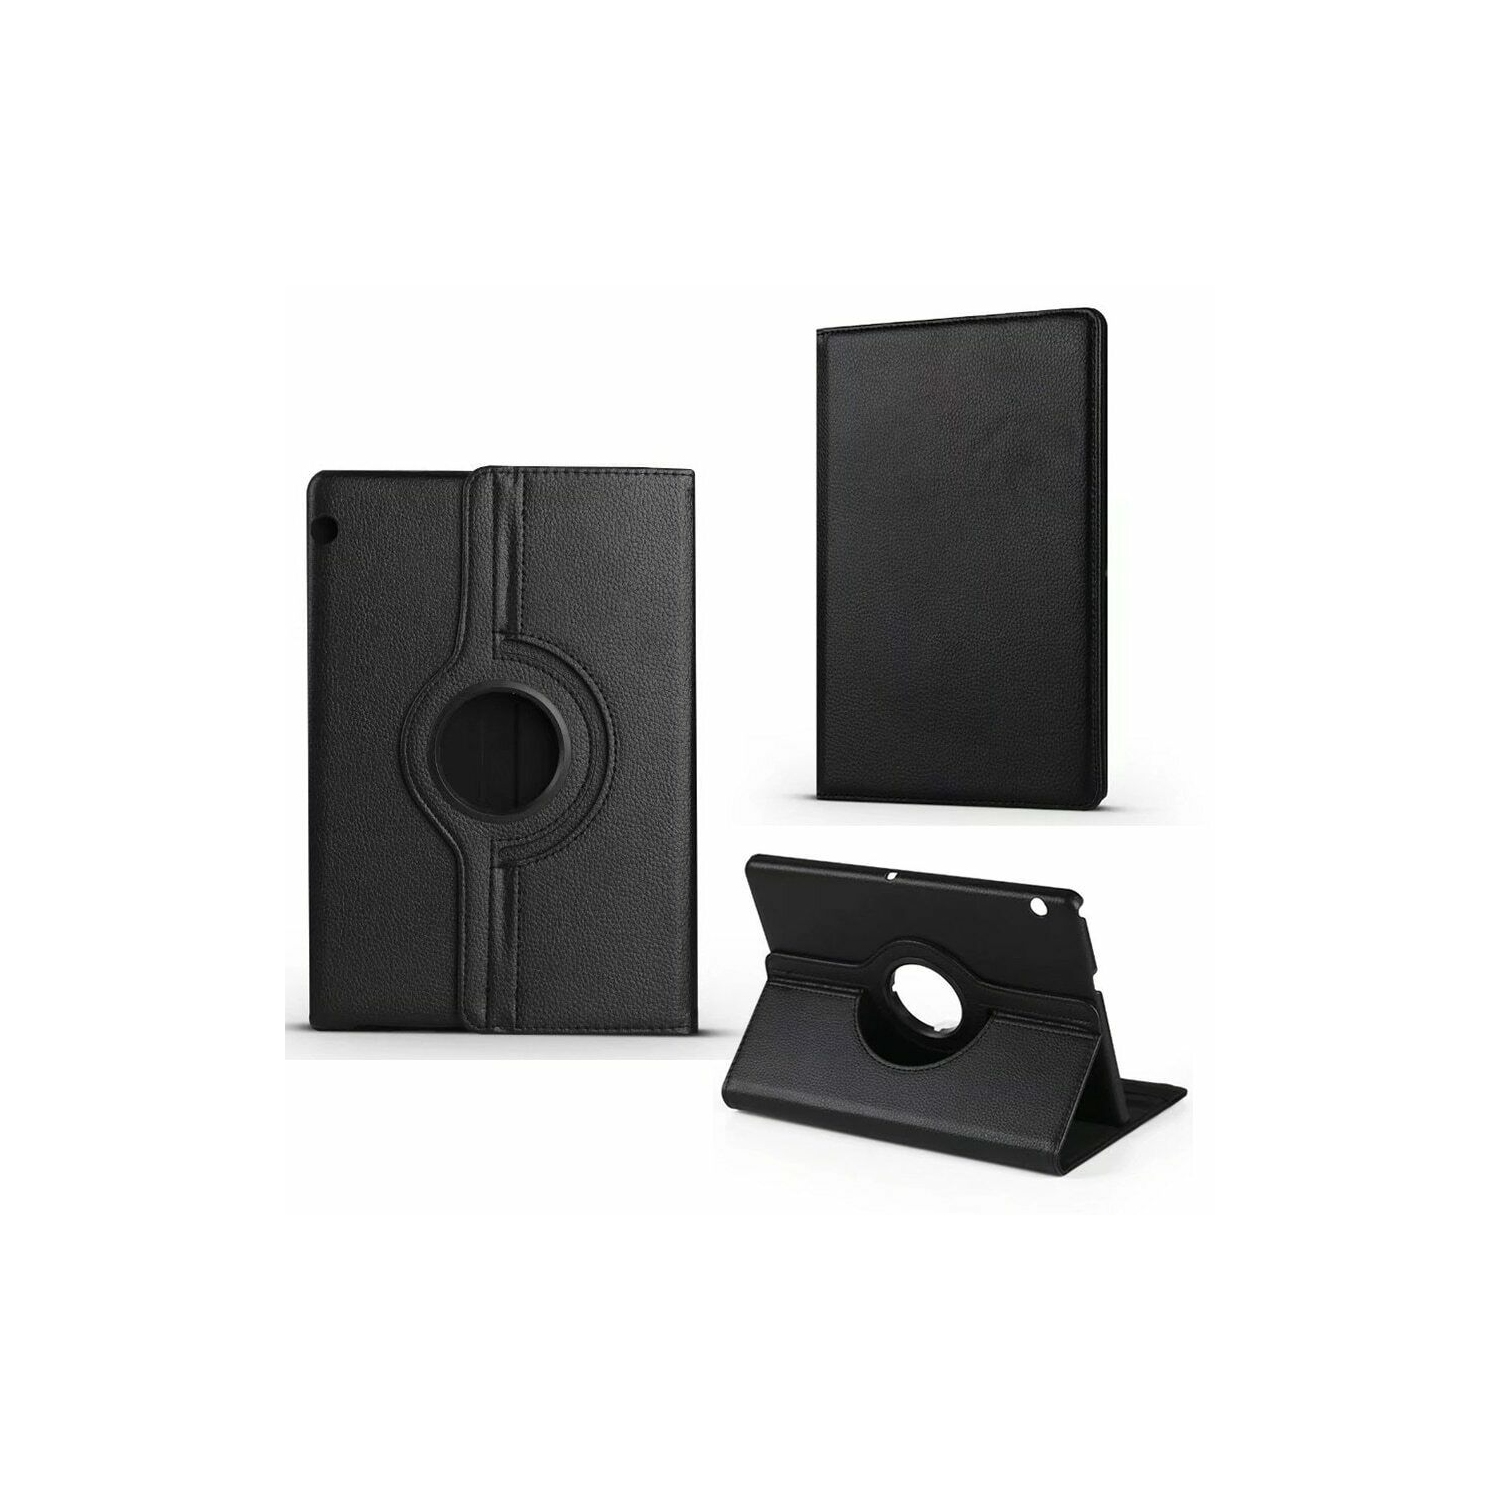 【CSmart】 360 Rotating PU Leather Stand Case Smart Cover for Huawei Mediapad T5 10 10.1", Black